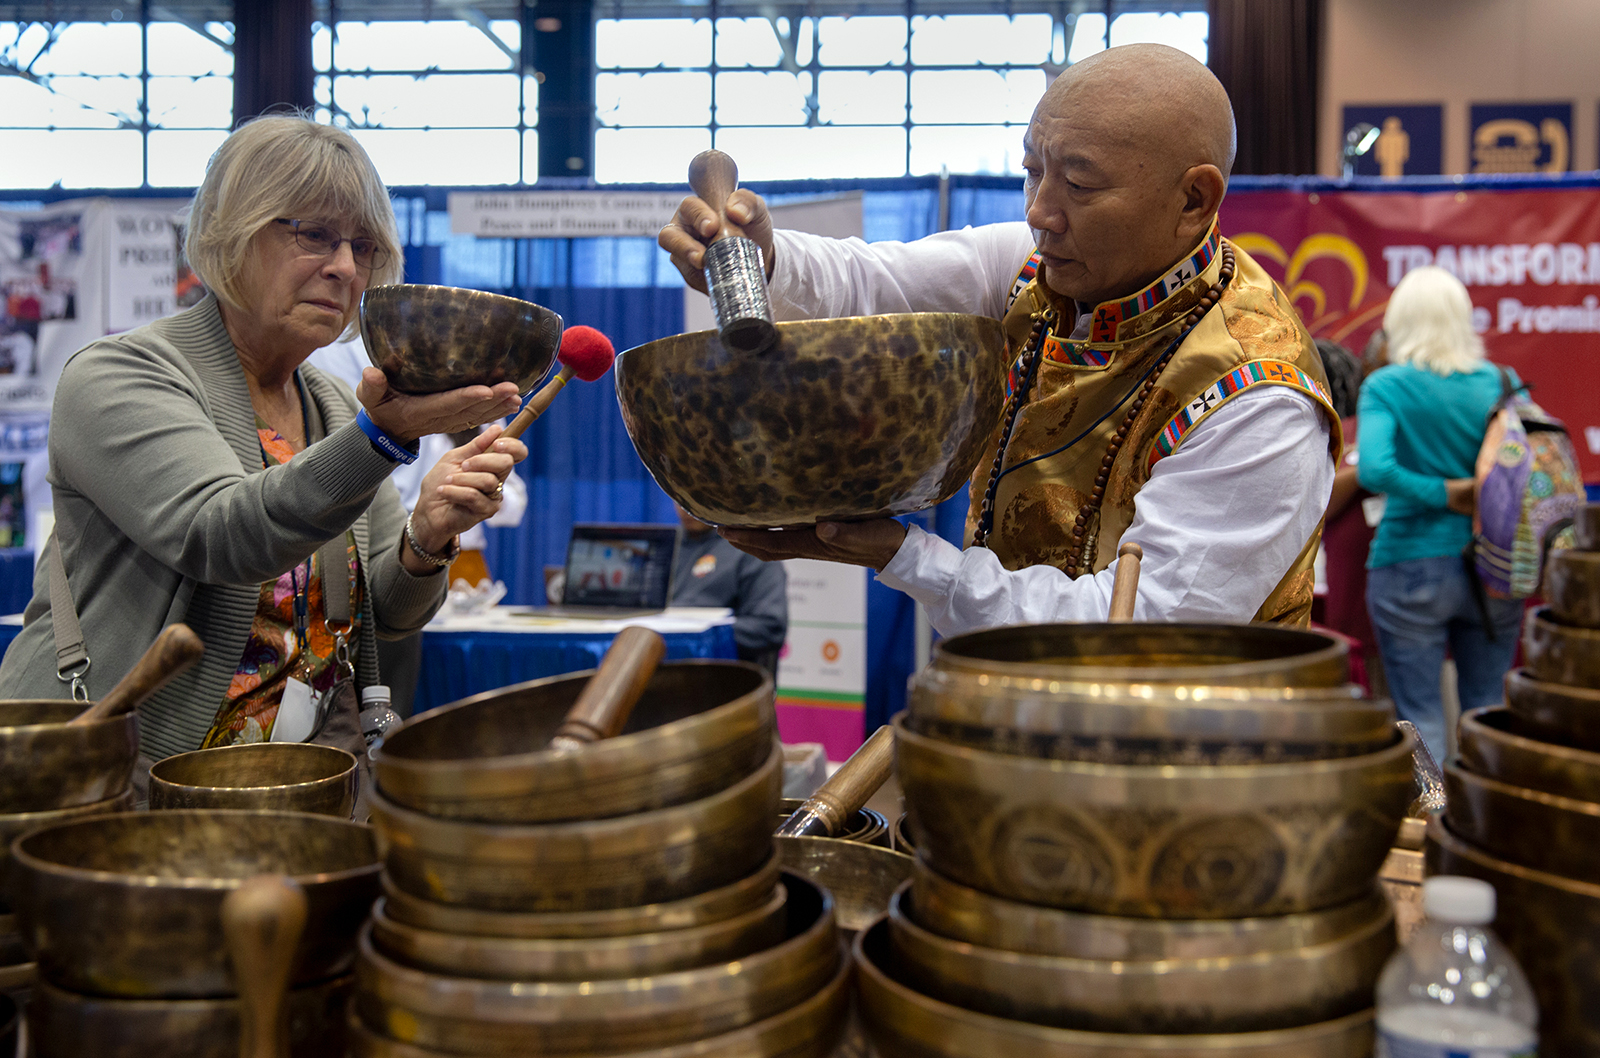 Jonor Lama, right, demonstrates the vibrations of singing bowls for Diane Maltester, left, in the exhibit hall of the Parliament of the World's Religions in Chicago on August 15, 2023. Maltester, a classical clarinetist, said she was interested in incorporating singing bowls into her music. Photo by Lauren Pond for RNS